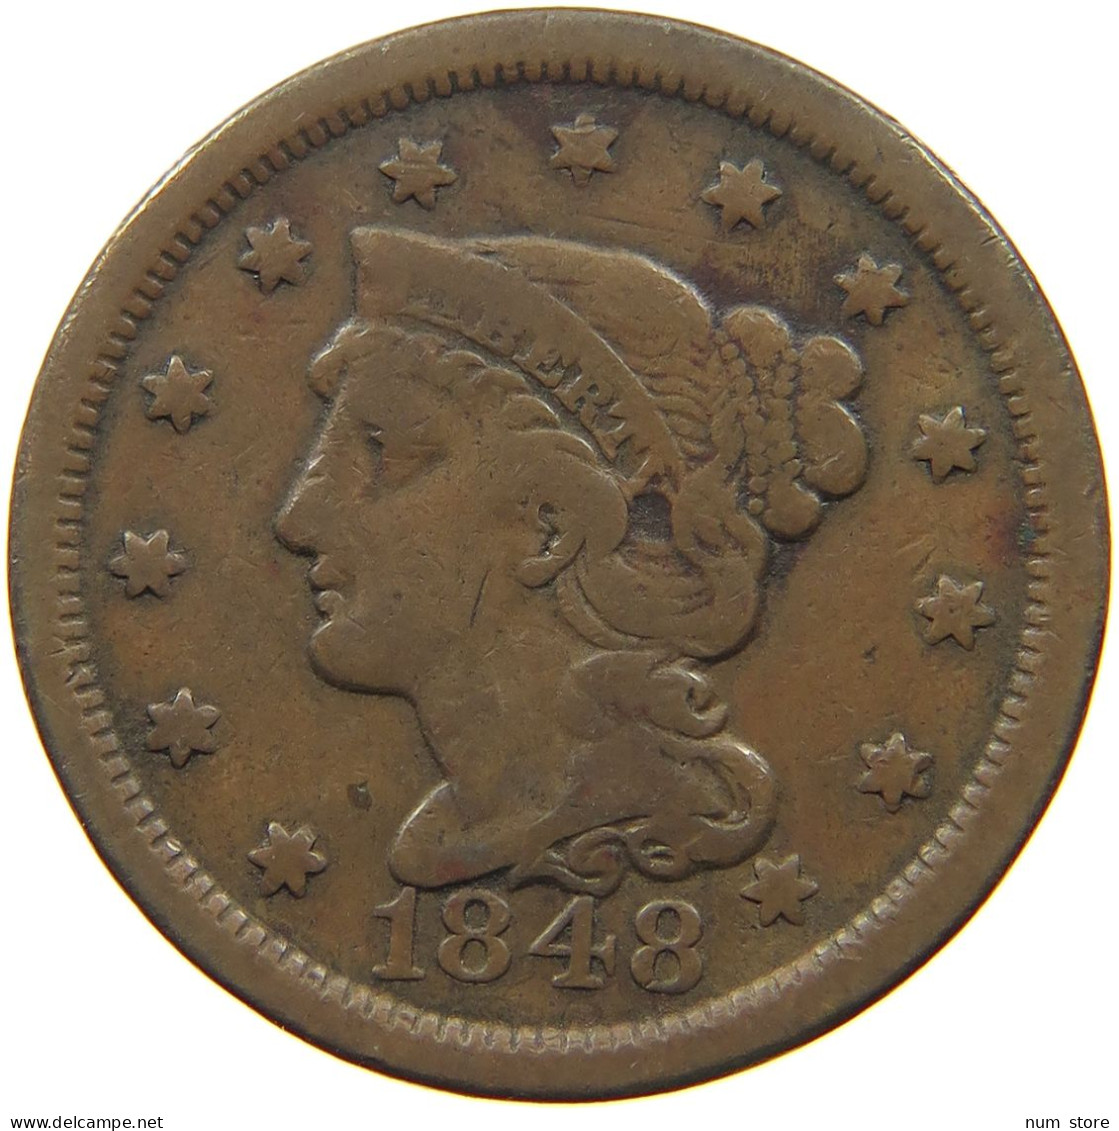 UNITED STATES OF AMERICA LARGE CENT 1848 BRAIDED HAIR #t141 0267 - 1840-1857: Braided Hair